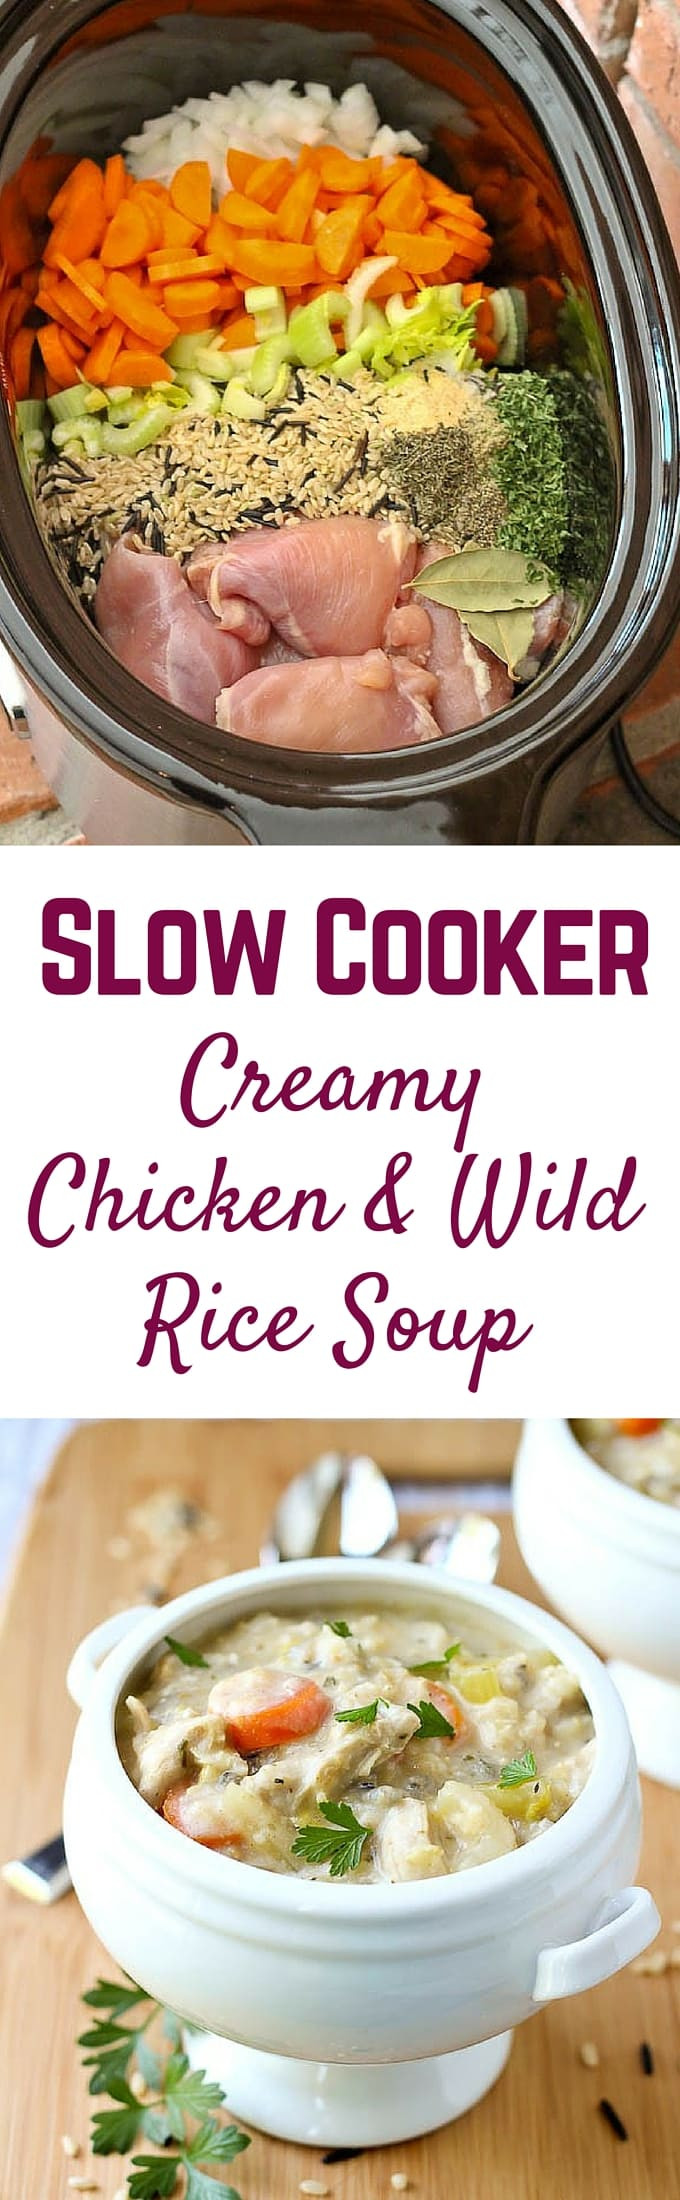 Creamy Chicken Wild Rice Soup Slow Cooker
 Rachel Cooks Slow Cooker Creamy Chicken and Wild Rice Soup